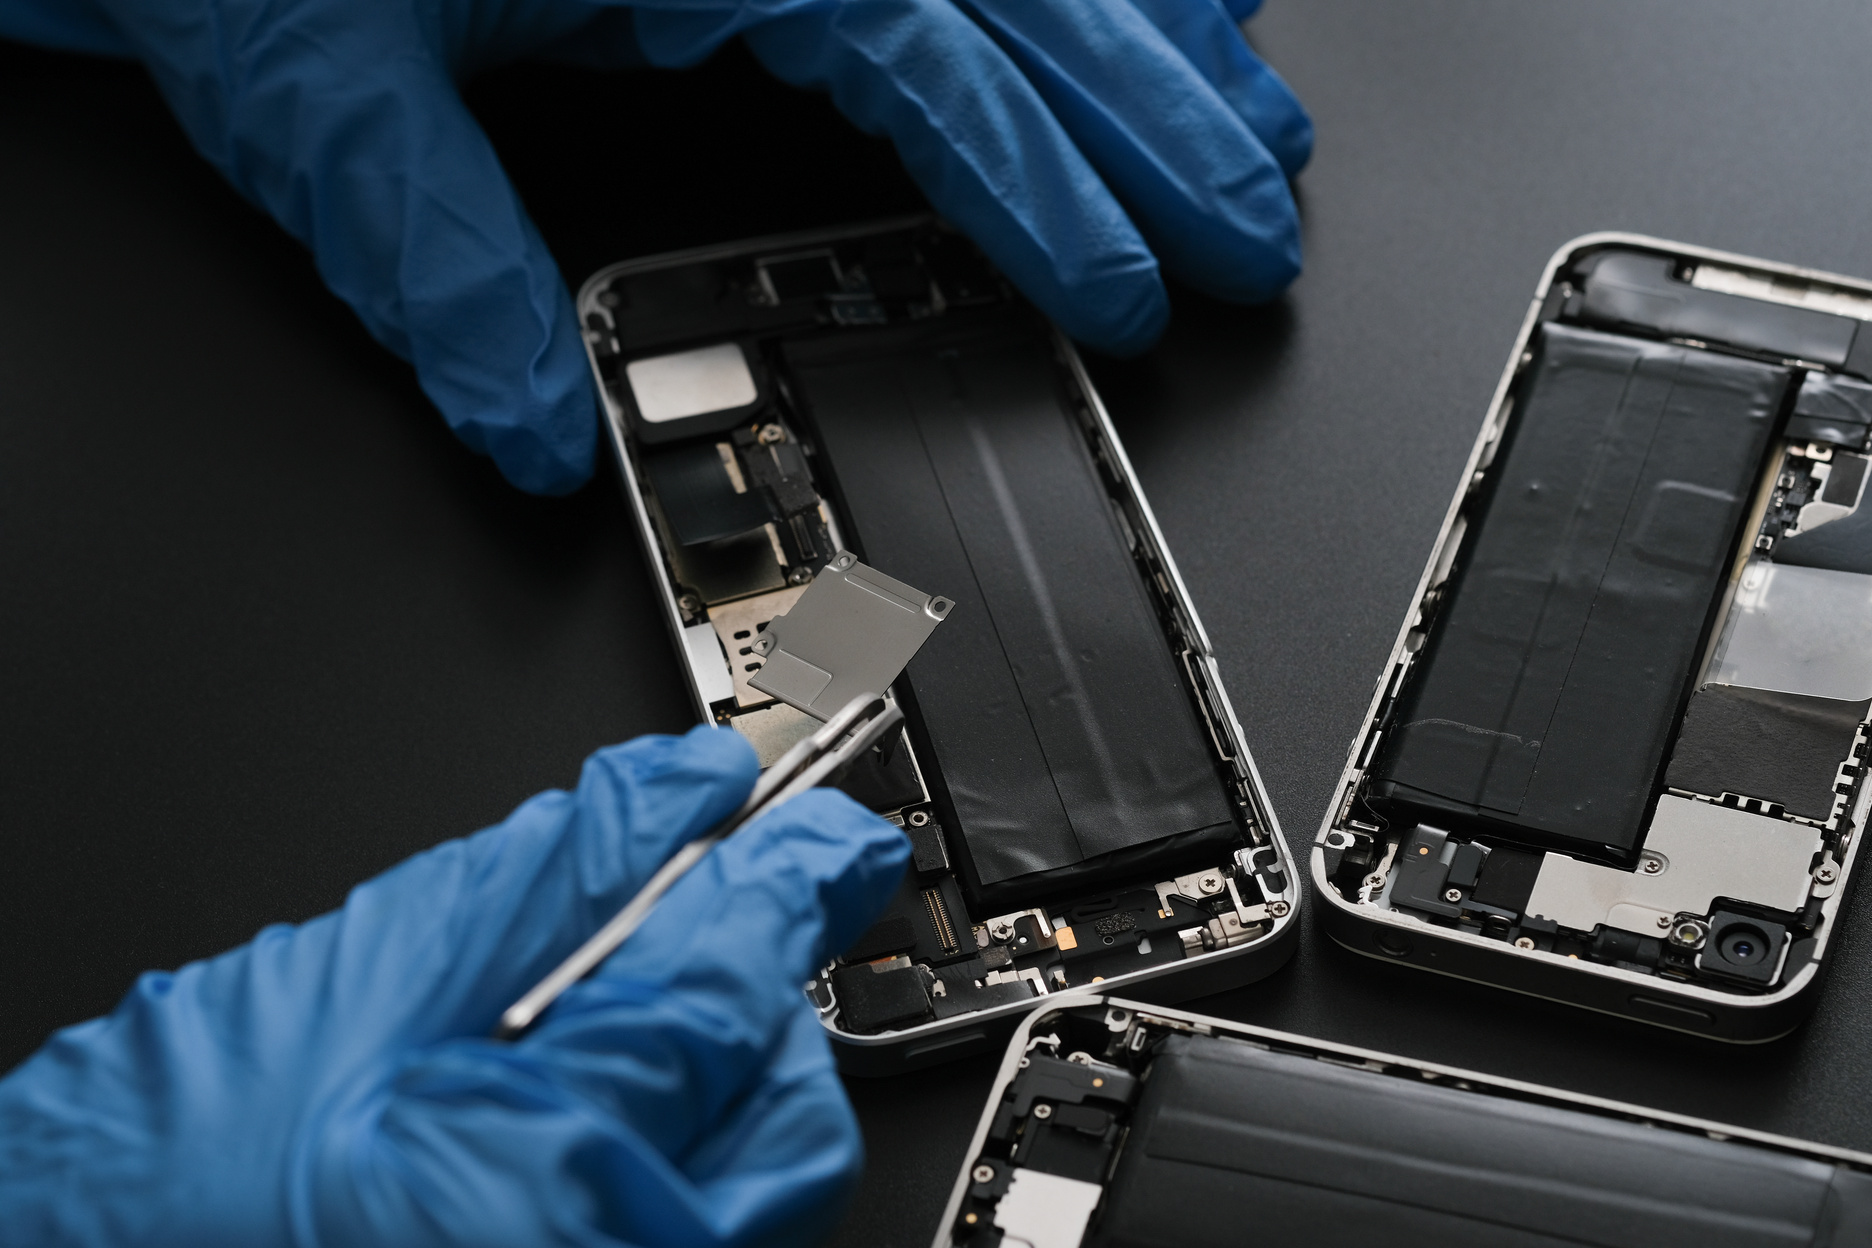 Technician repairing the Cell phone parts and tools for recovery repair phone smartphone